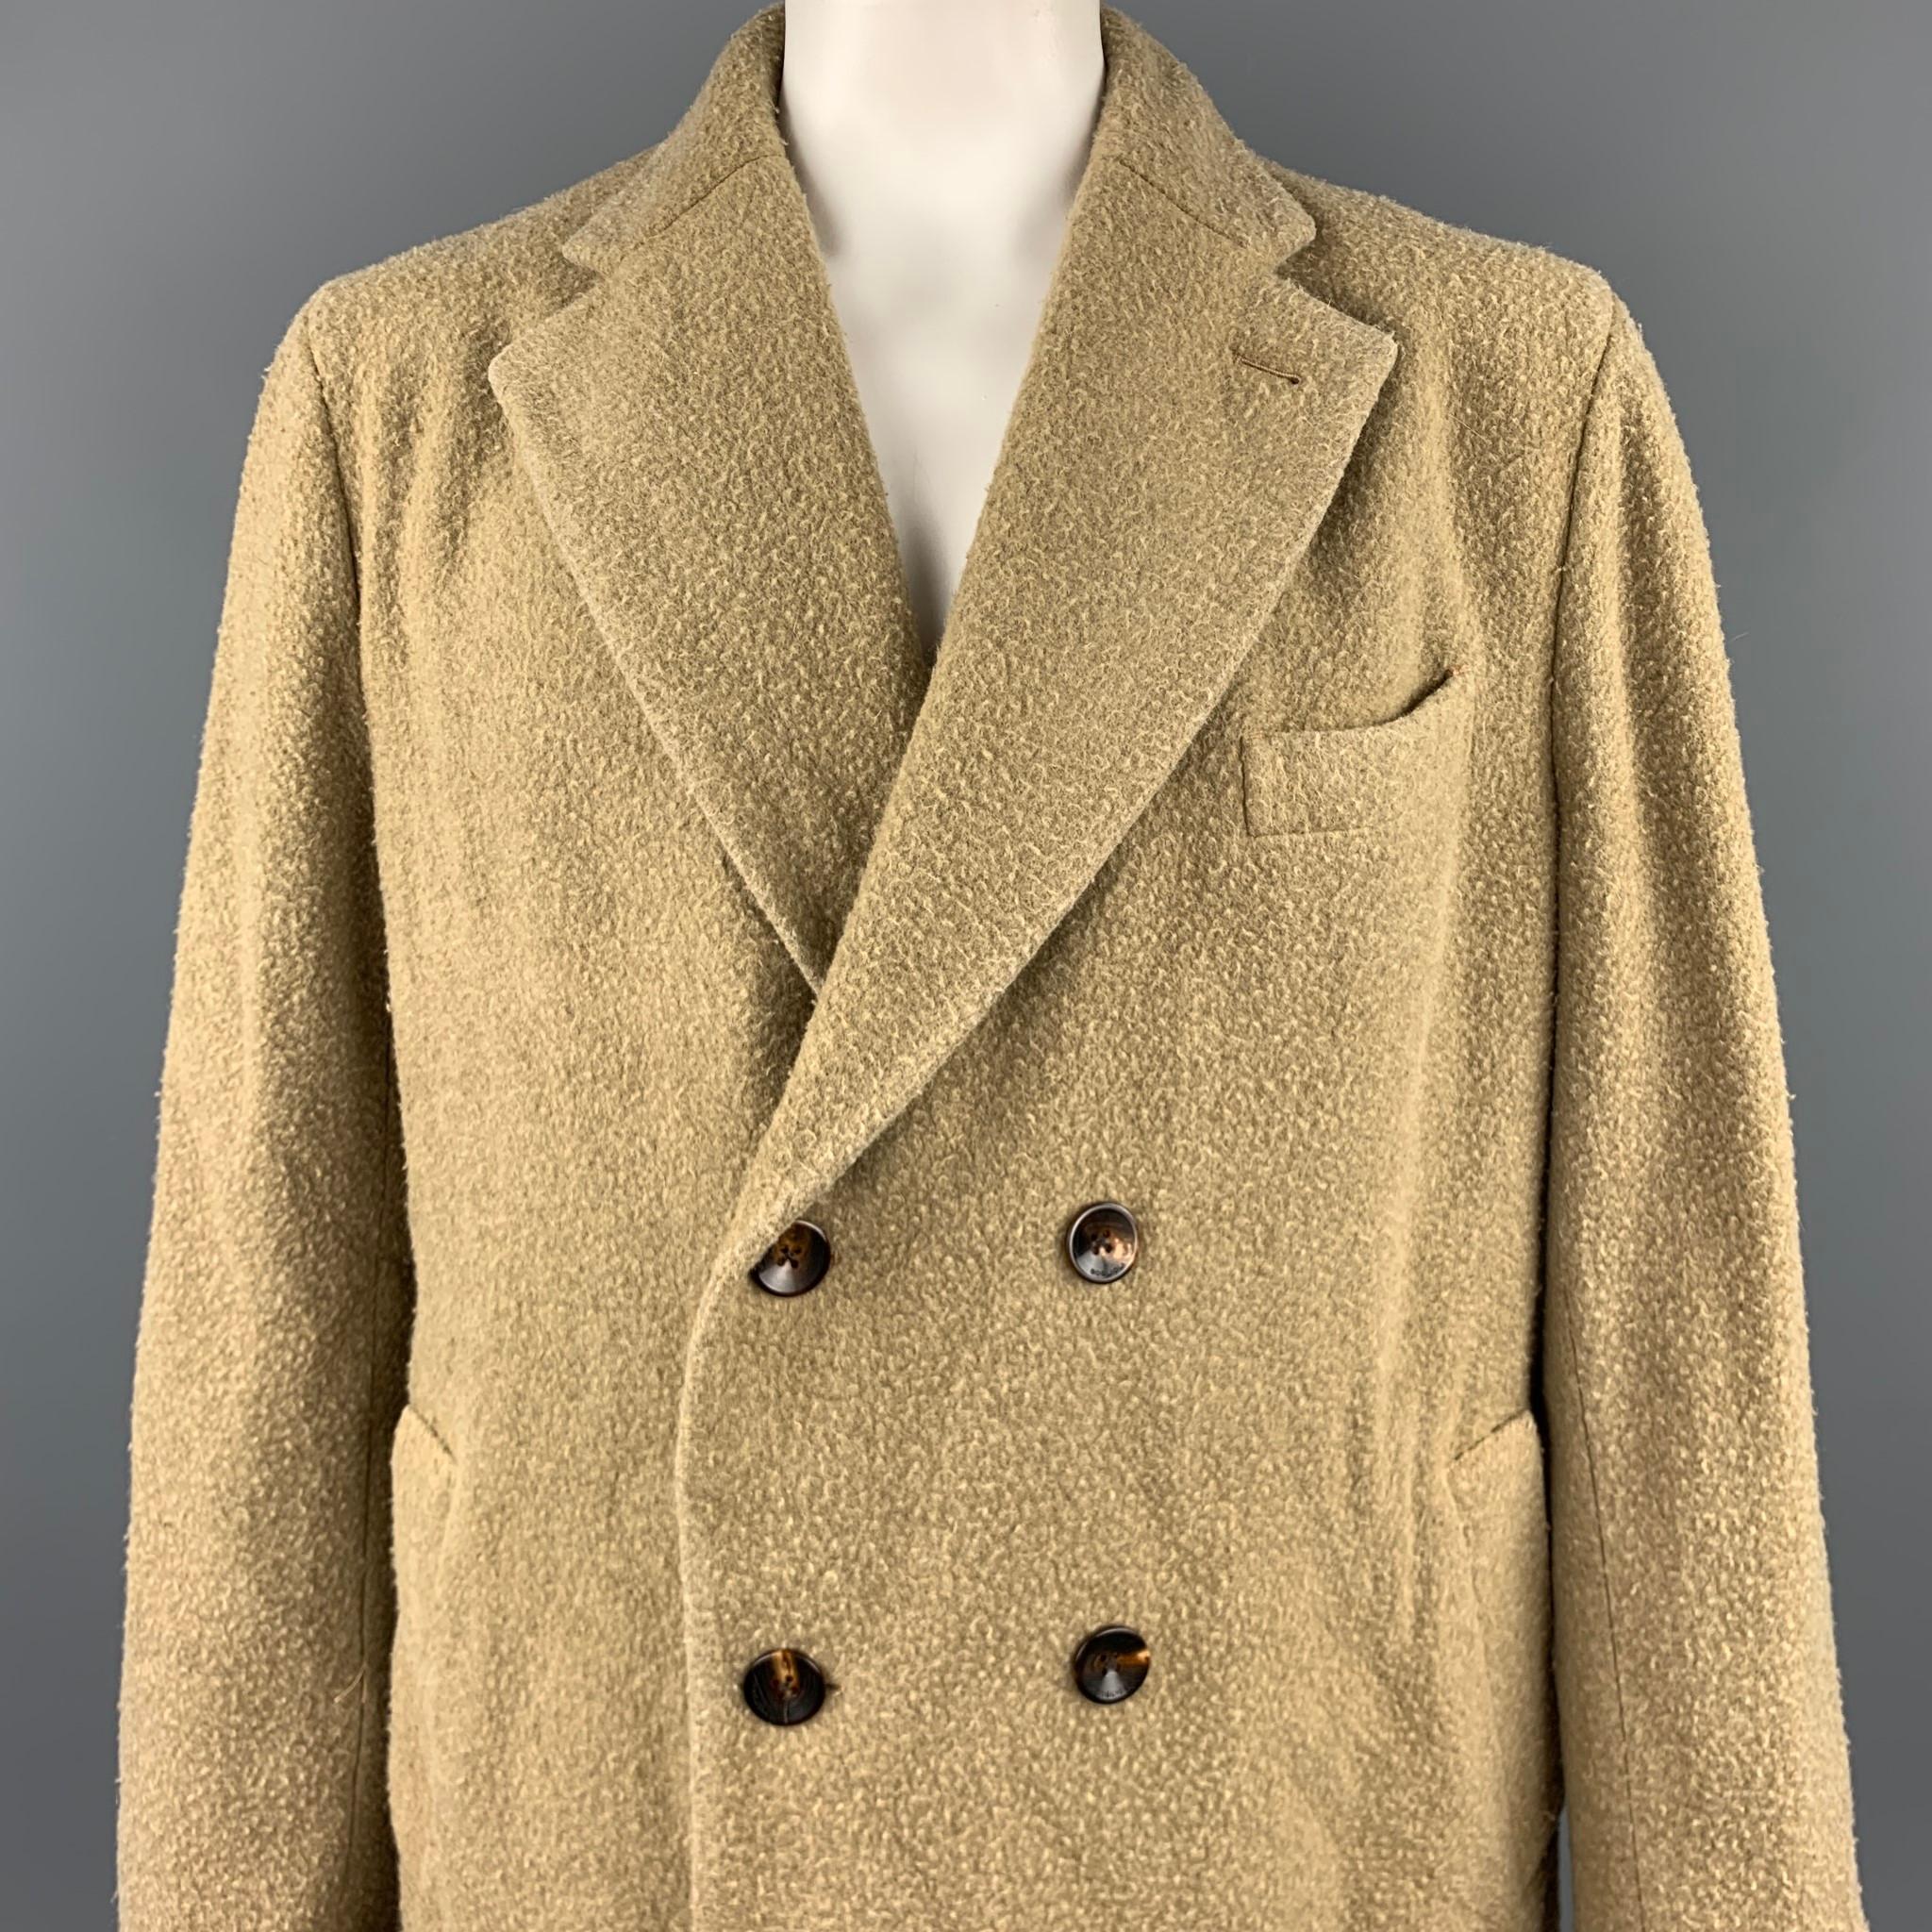 BOGLIOLI coat comes in a moss textured wool / polyester featuring a notch lapel, slit pockets, back belt, and double breasted closure. Minor wear. Made in Italy.

Good Pre-Owned Condition.
Marked: 46

Measurements:

Shoulder: 19 in. 
Chest: 46 in.